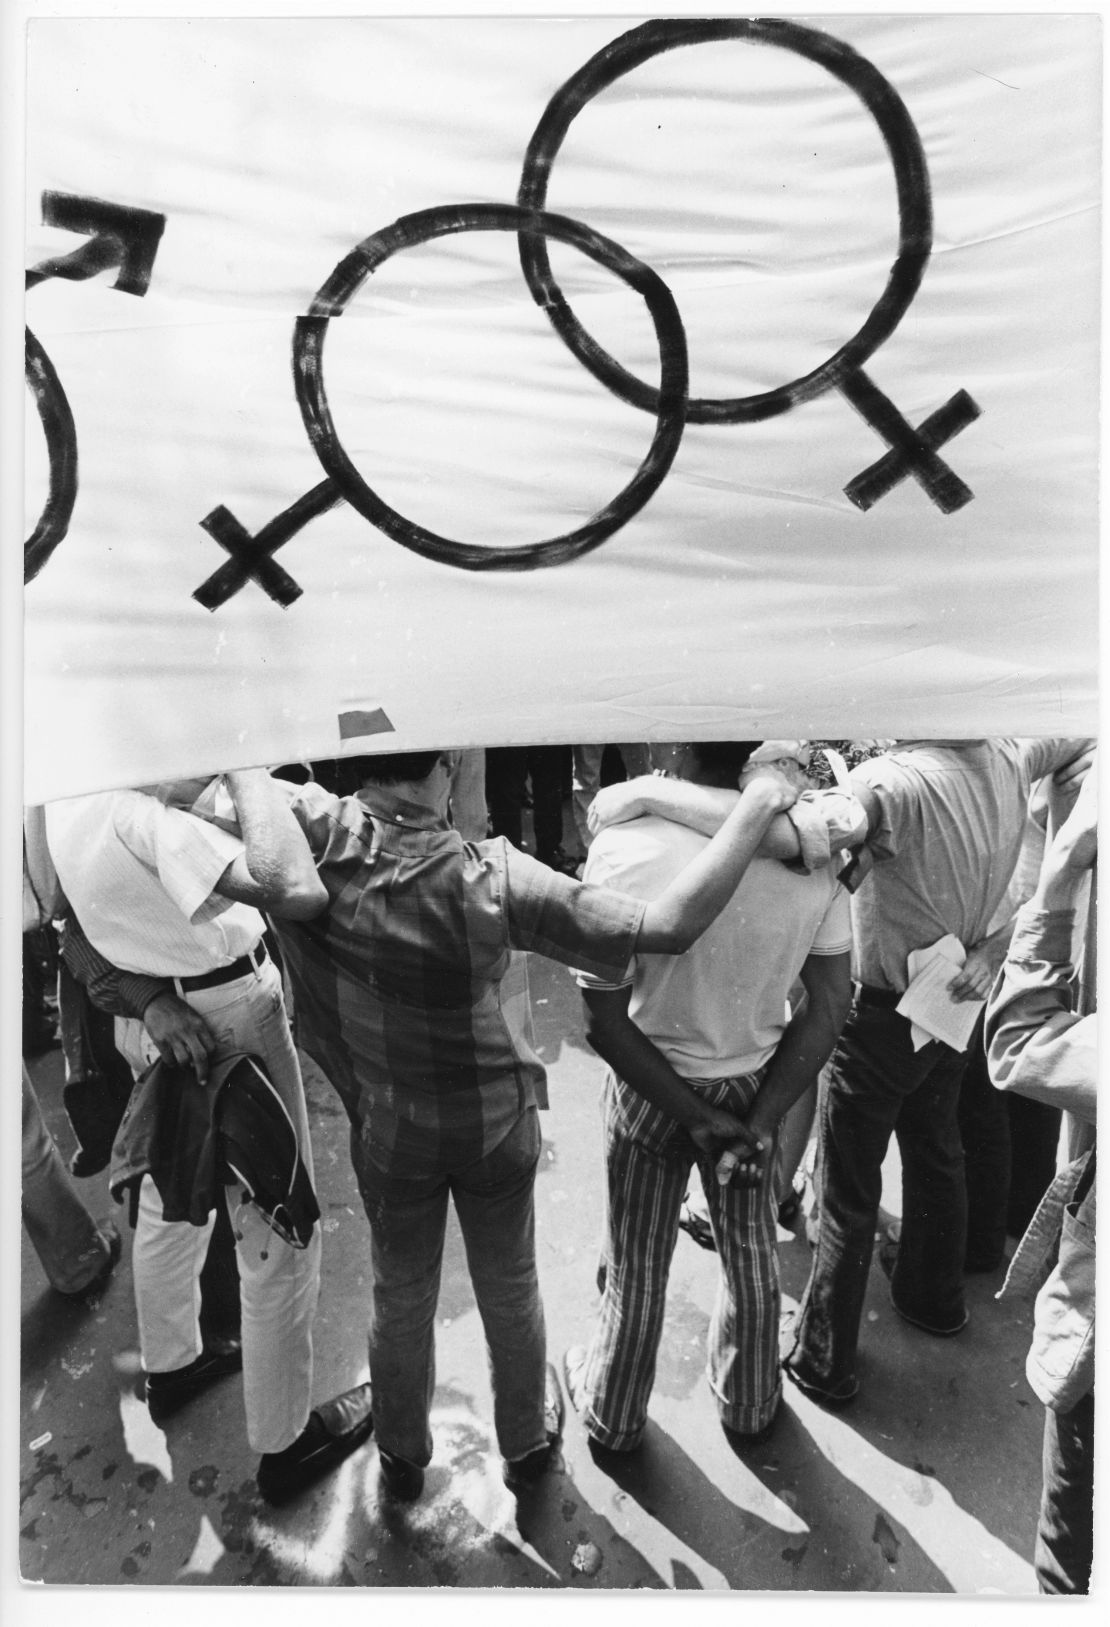 "First Gay Pride March" (July 27, 1969) by Fred W. McDarrah